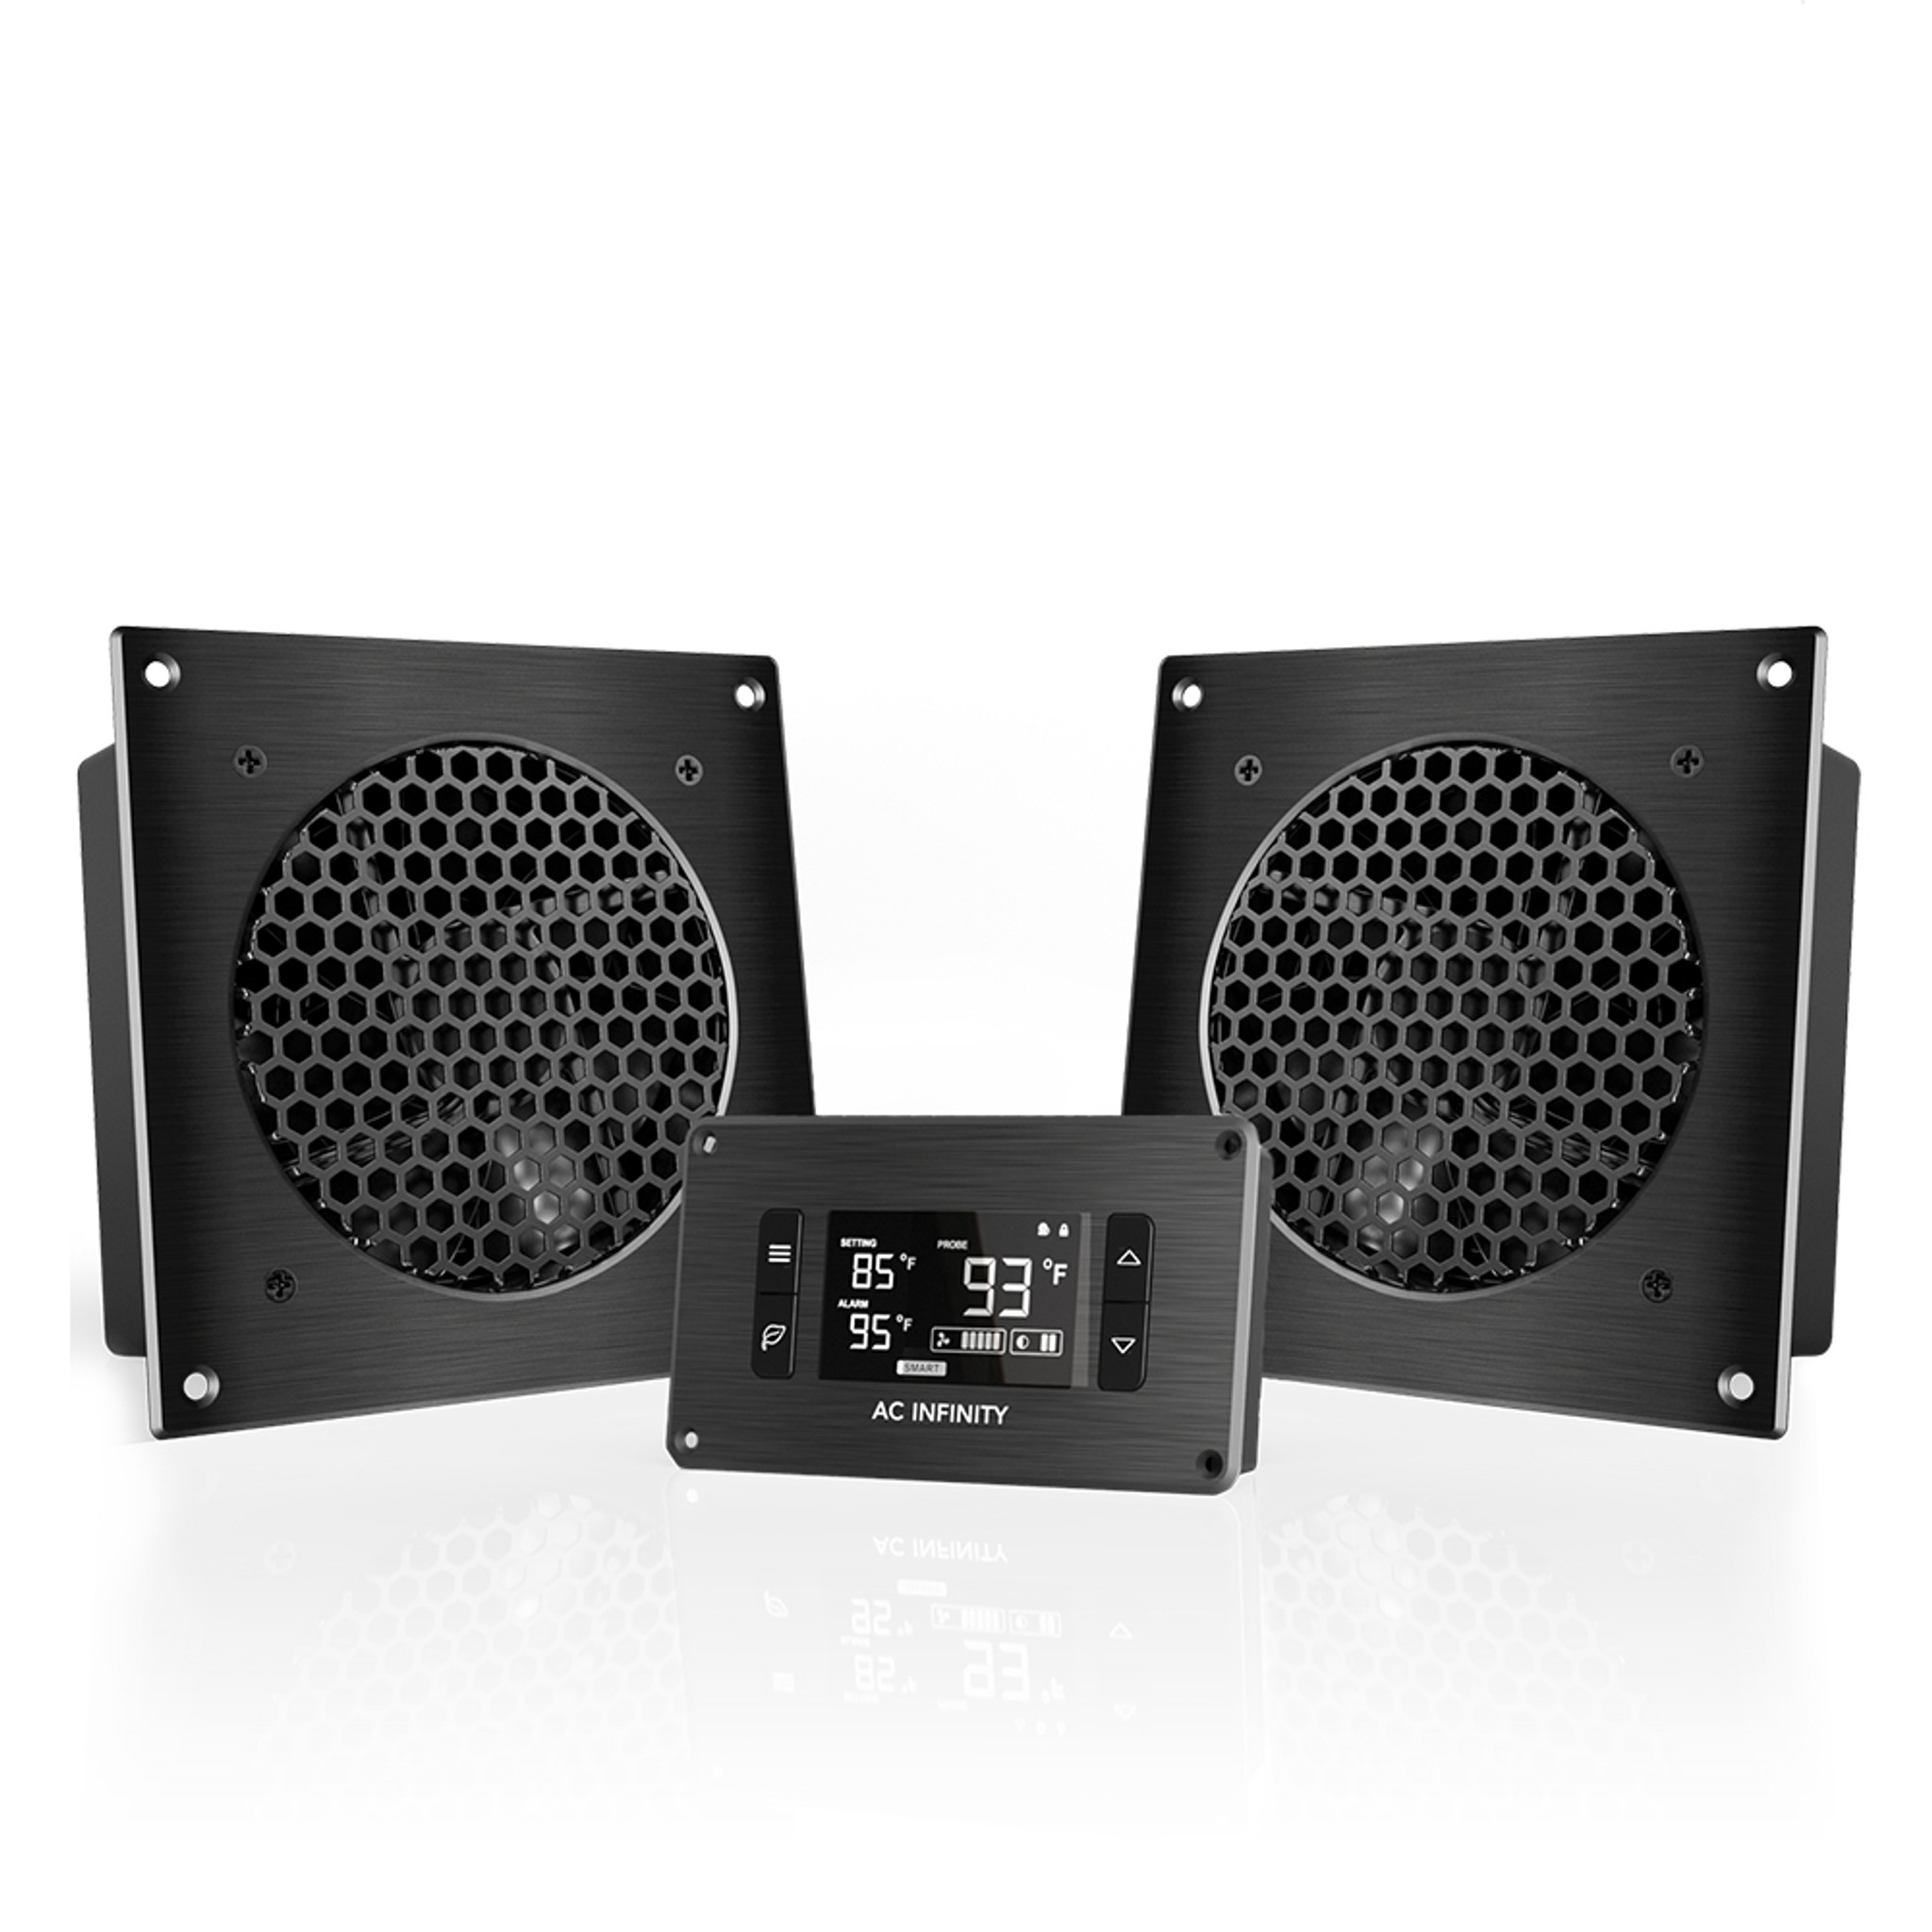 AIRPLATE T8, Home Theater and AV Quiet Cabinet Cooling Dual-Fan System, 6 Inch